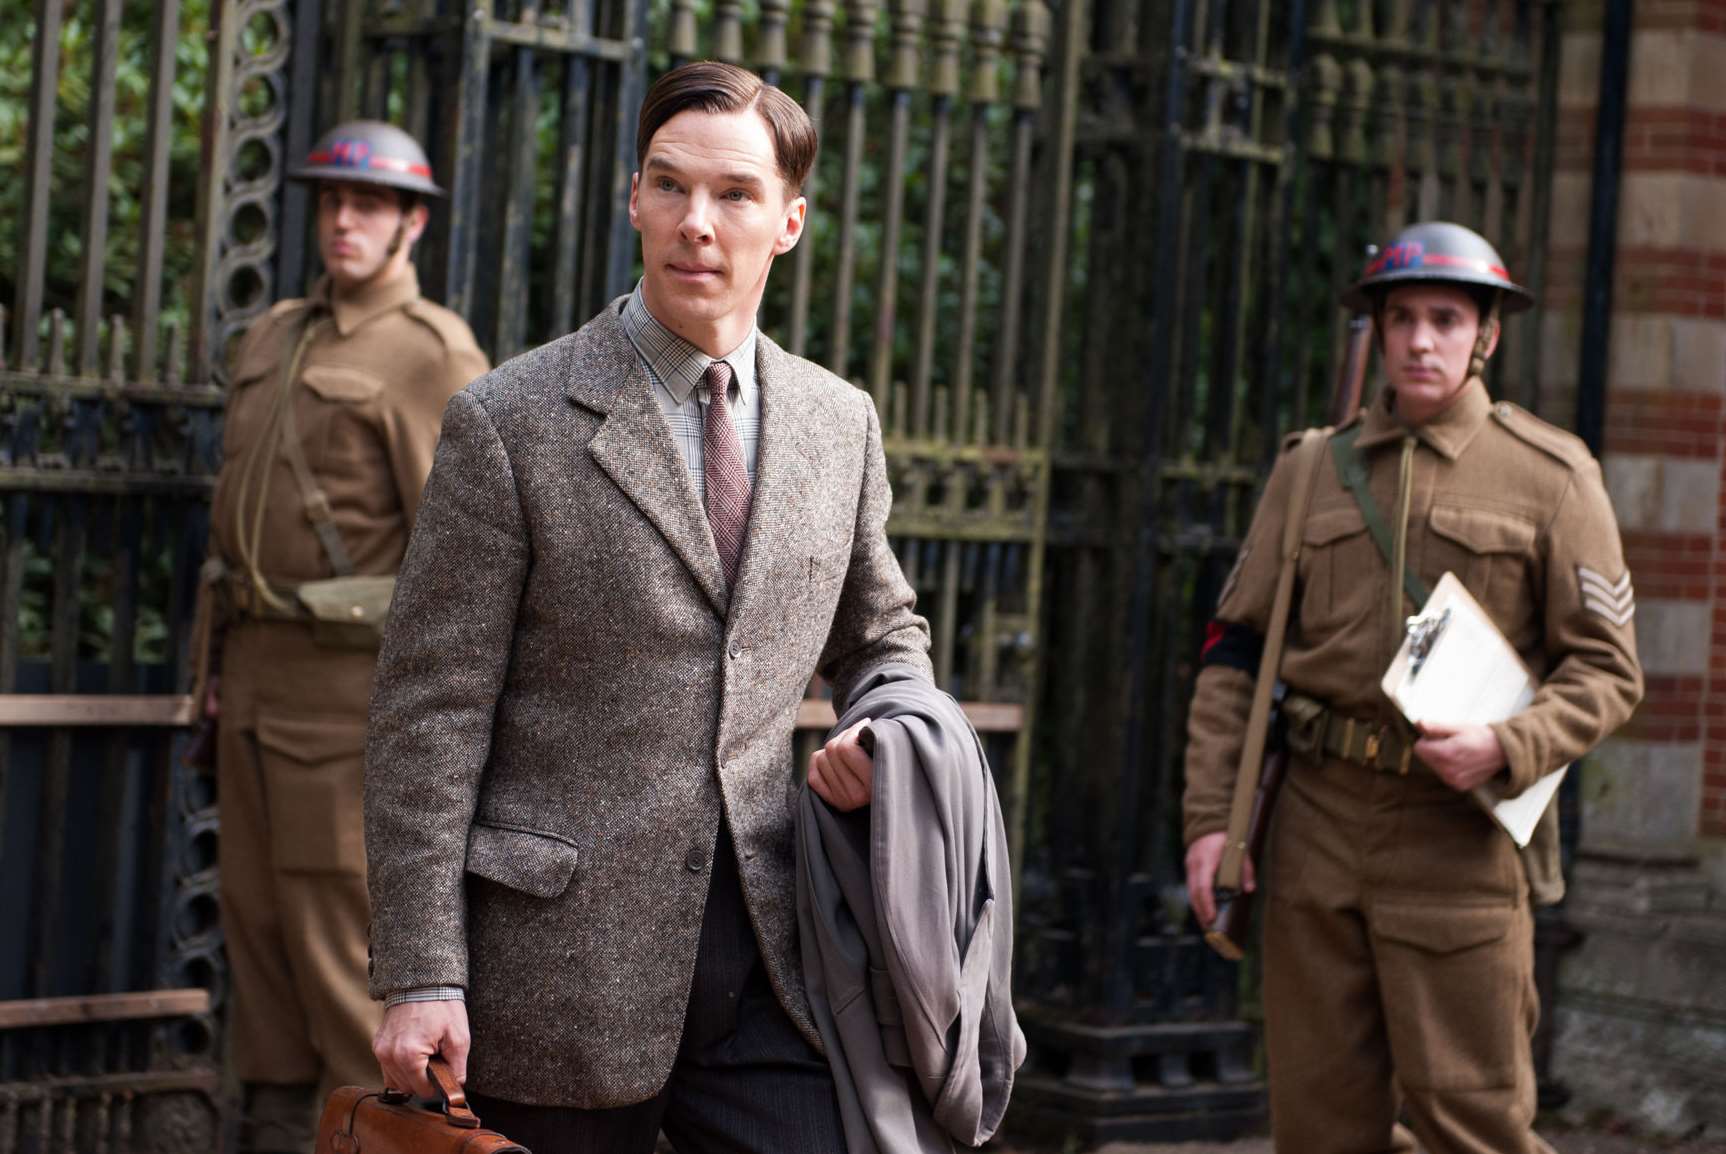 Benedict Cumberbatch stars as Alan Turing in the Imitation Game Picture: PA Photo/Handout/StudioCanal